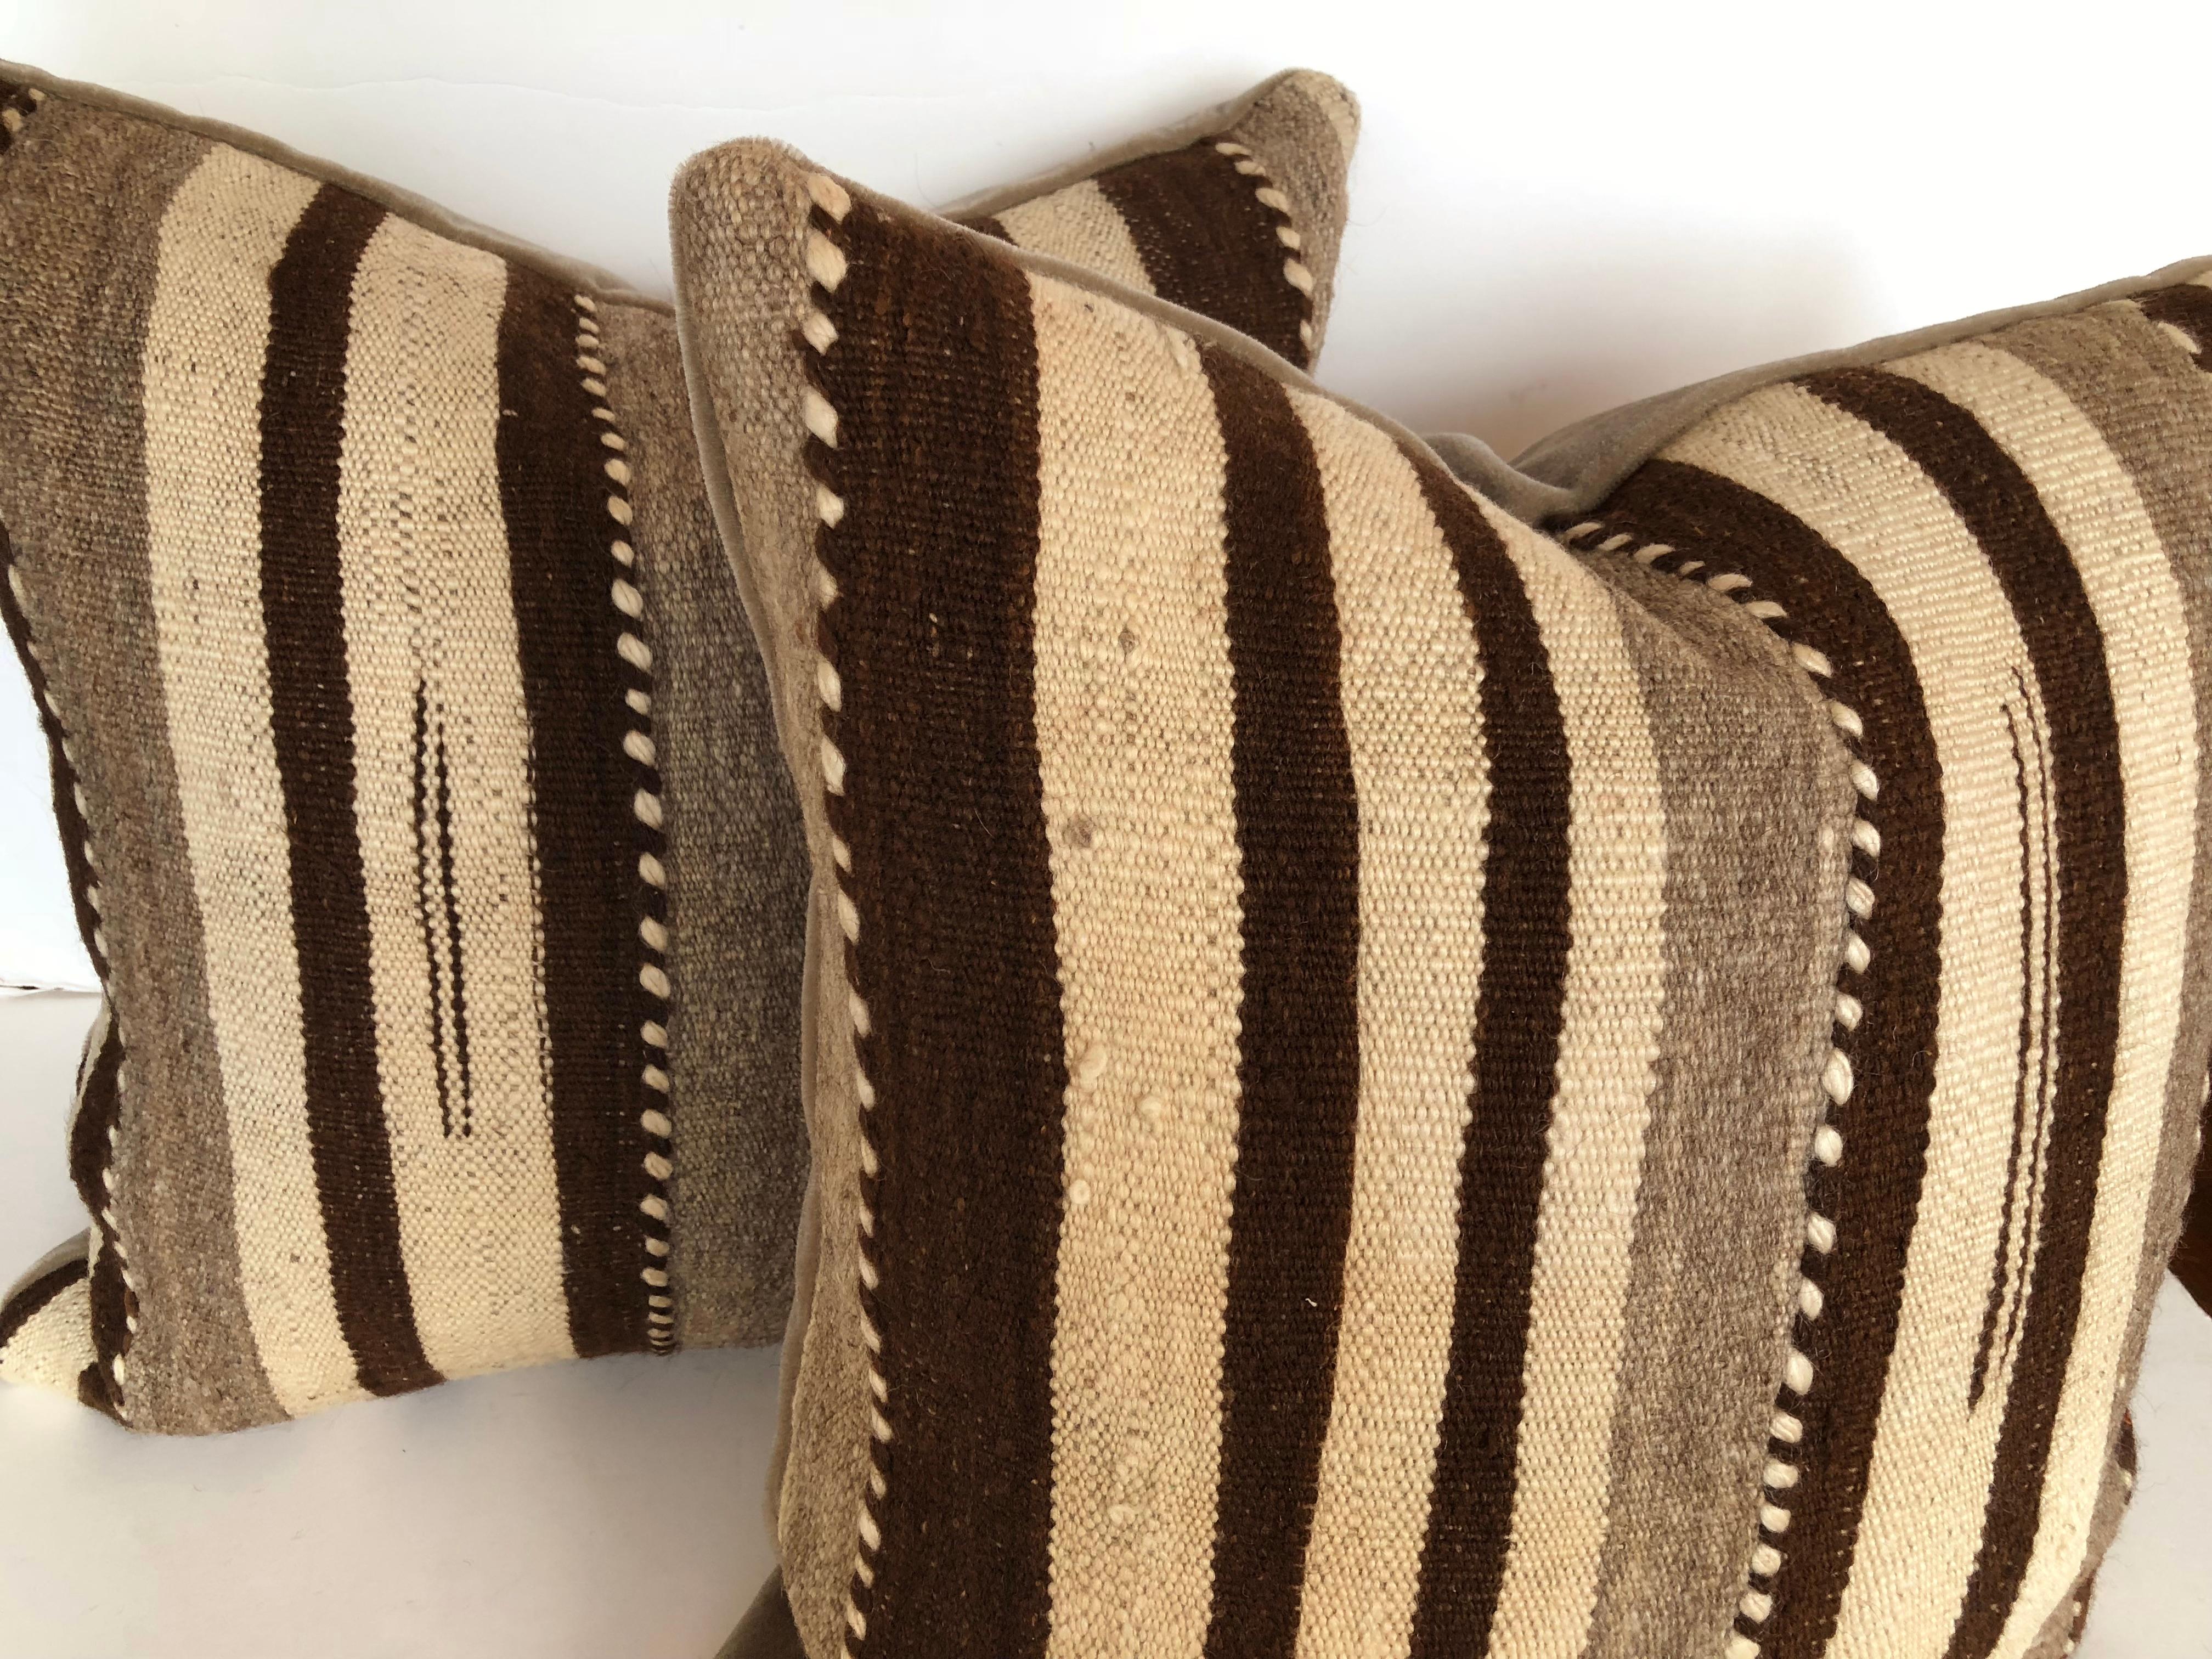 Custom pillows cut from a vintage hand loomed wool Moroccan Berber rug from the Atlas Mountains. Wool is soft and lustrous with all natural color. Pillow is backed in mohair, filled with an insert of 50/50 down and feathers and hand sewn closed.